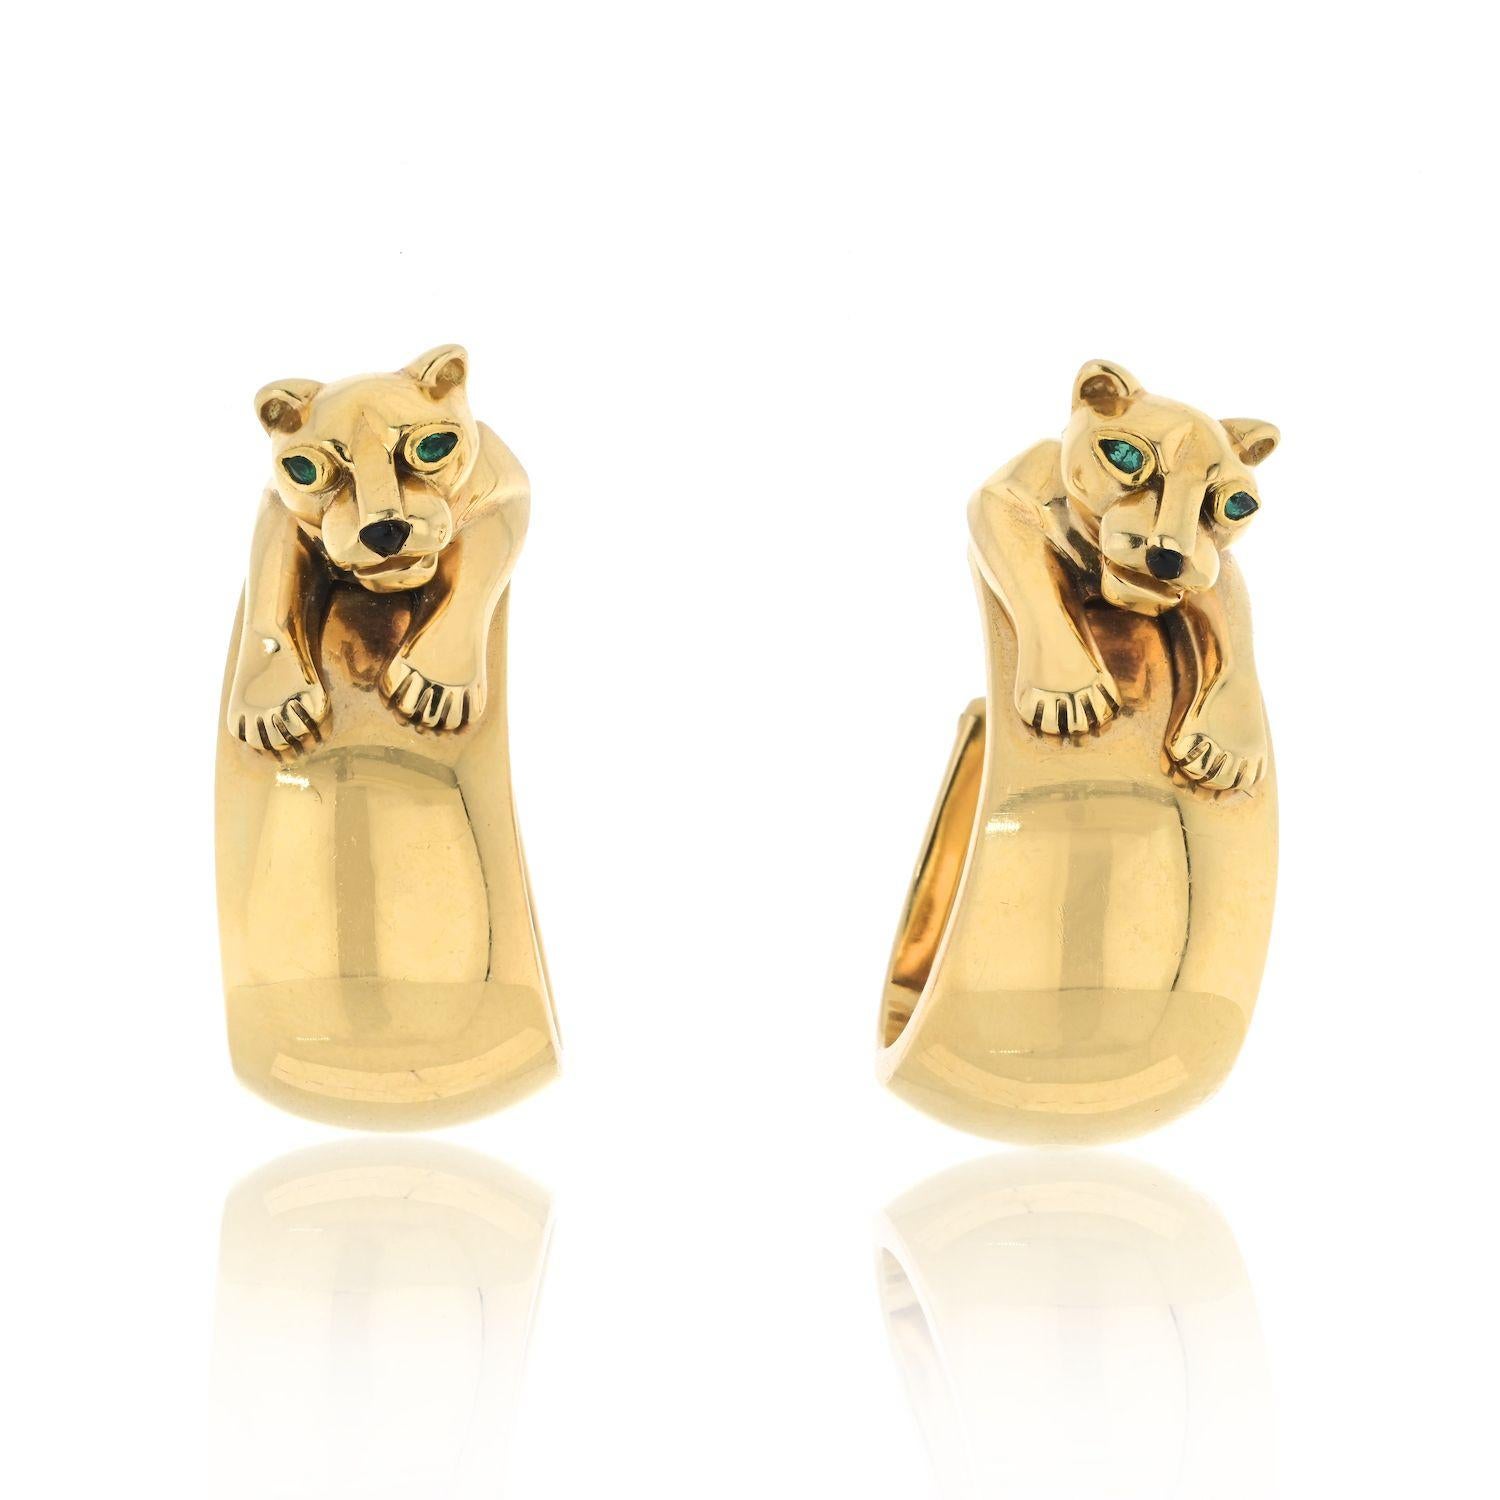 Indulge in opulence with this extraordinary large pair of Cartier Panther Earrings, a masterpiece that embodies the brand's iconic design aesthetic. Crafted as part of the rare and limited signature panther collection, these earrings are a true